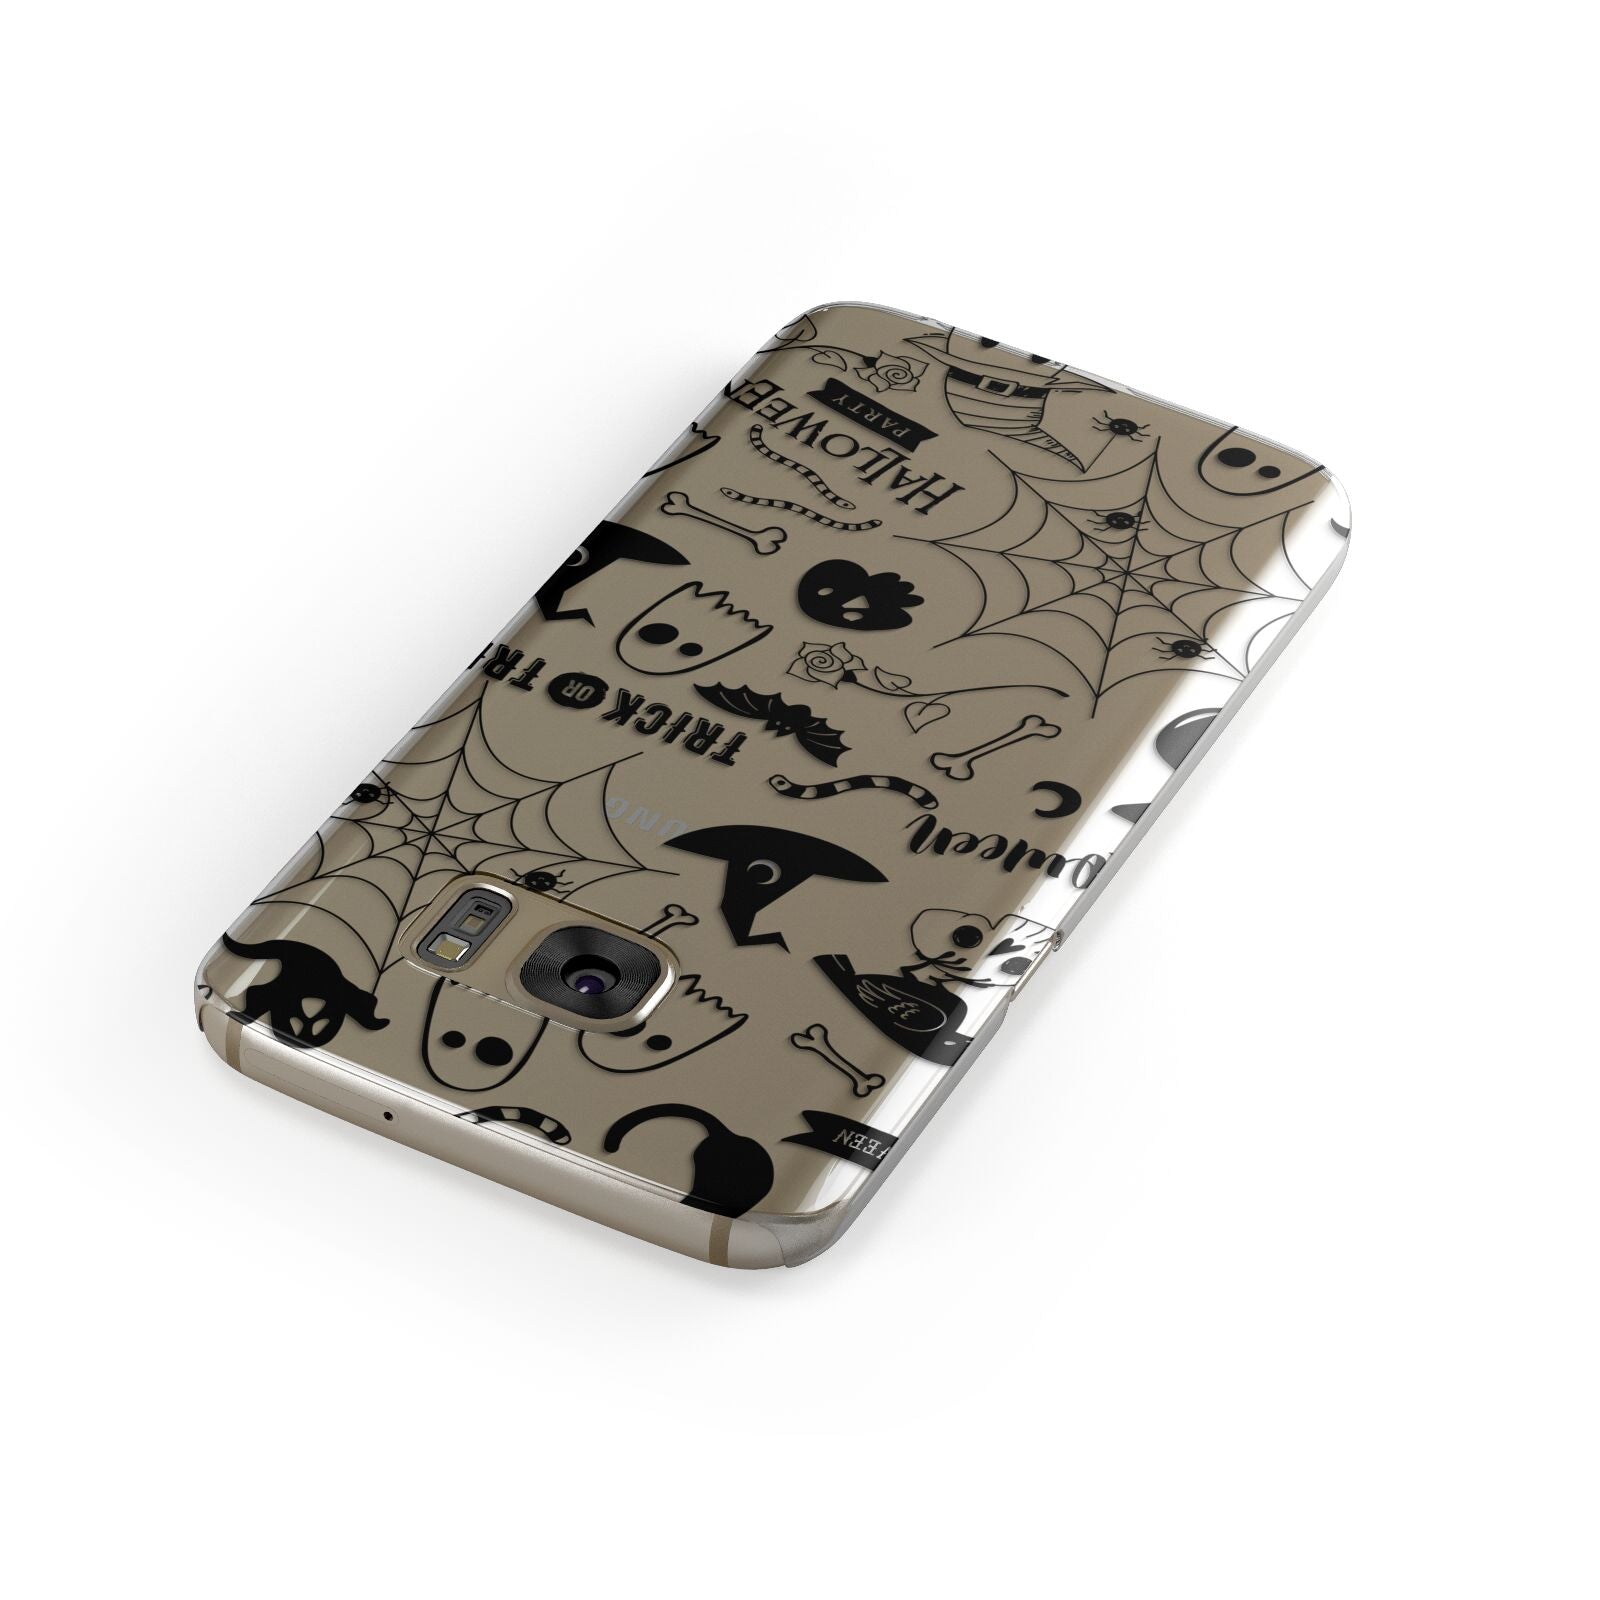 Monochrome Halloween Illustrations Samsung Galaxy Case Front Close Up